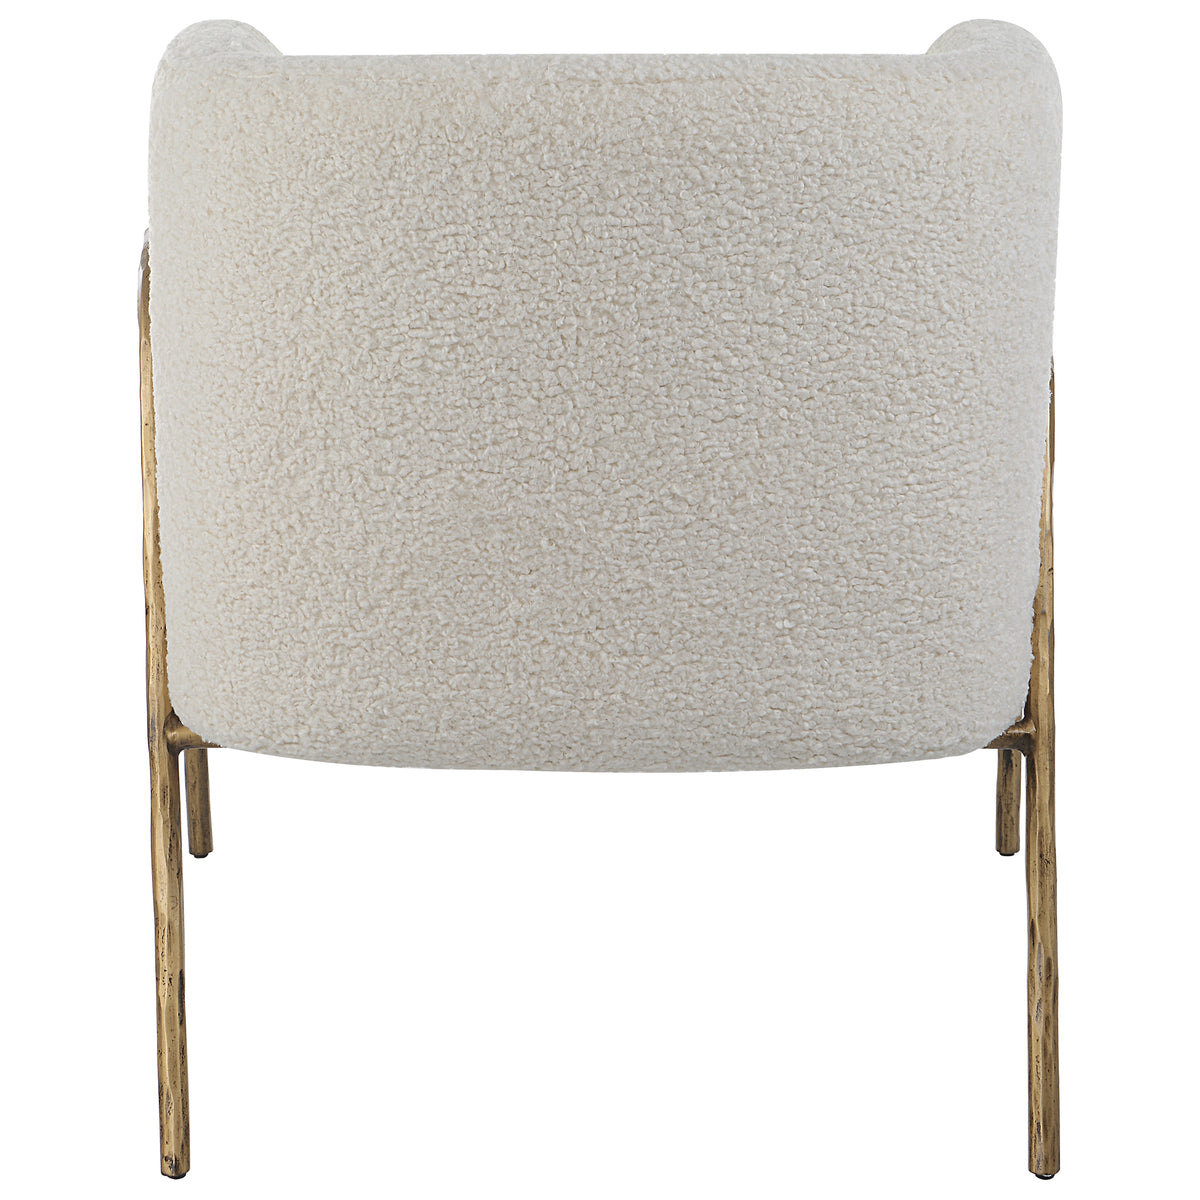 Uttermost Jacobsen Off White Shearling Accent Chair